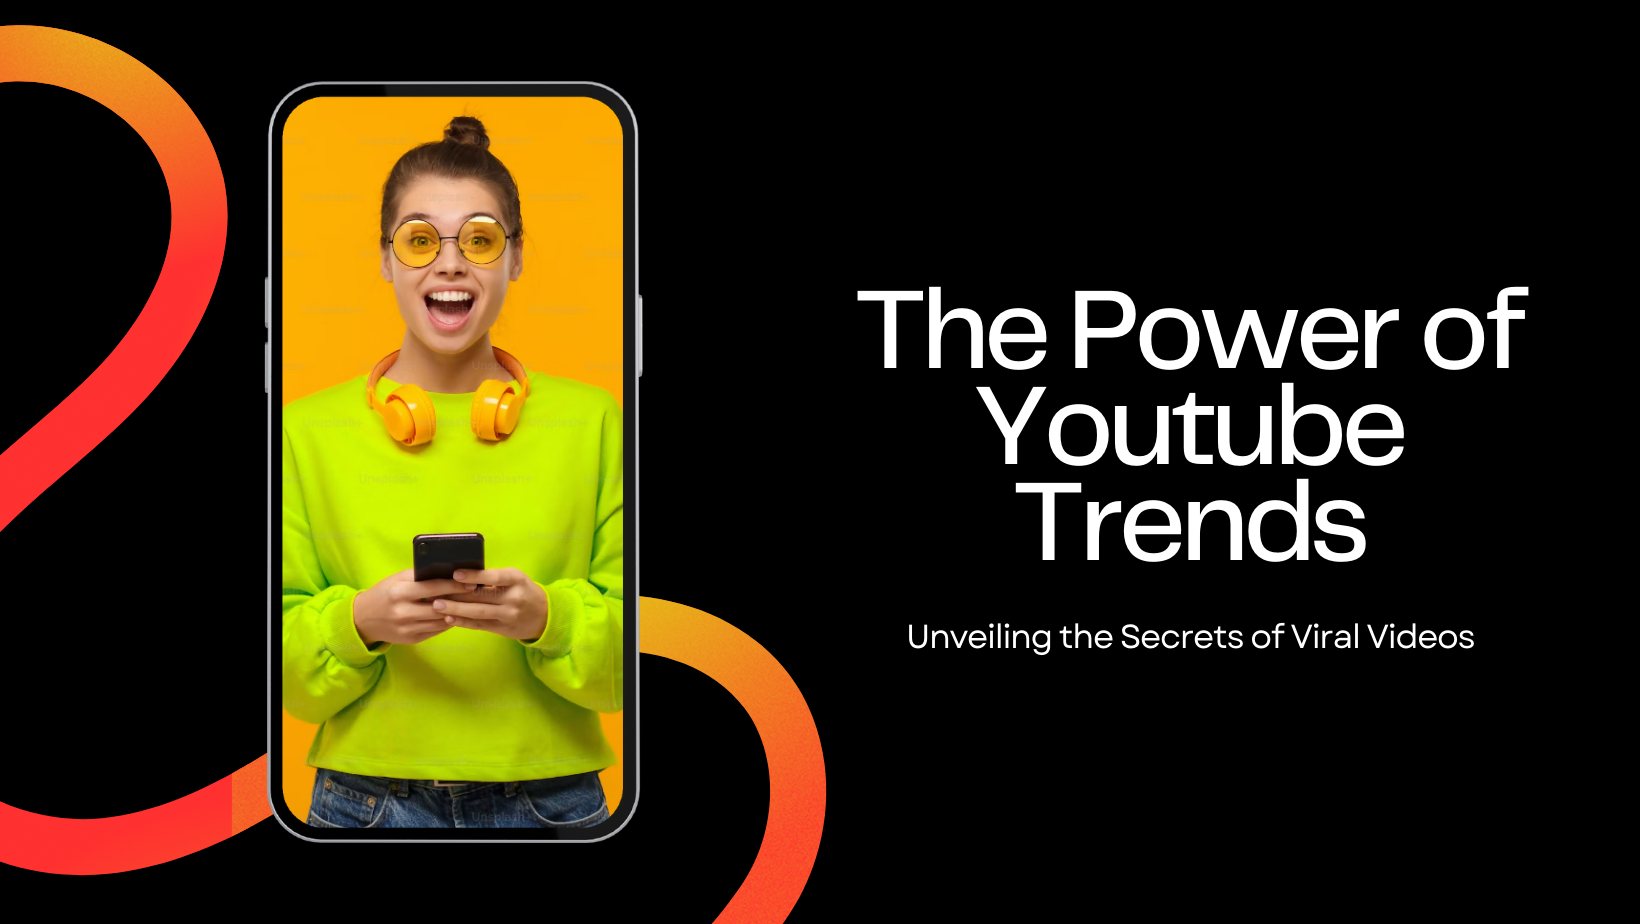 The Power of Youtube Trends: Unveiling the Secrets of Viral Videos